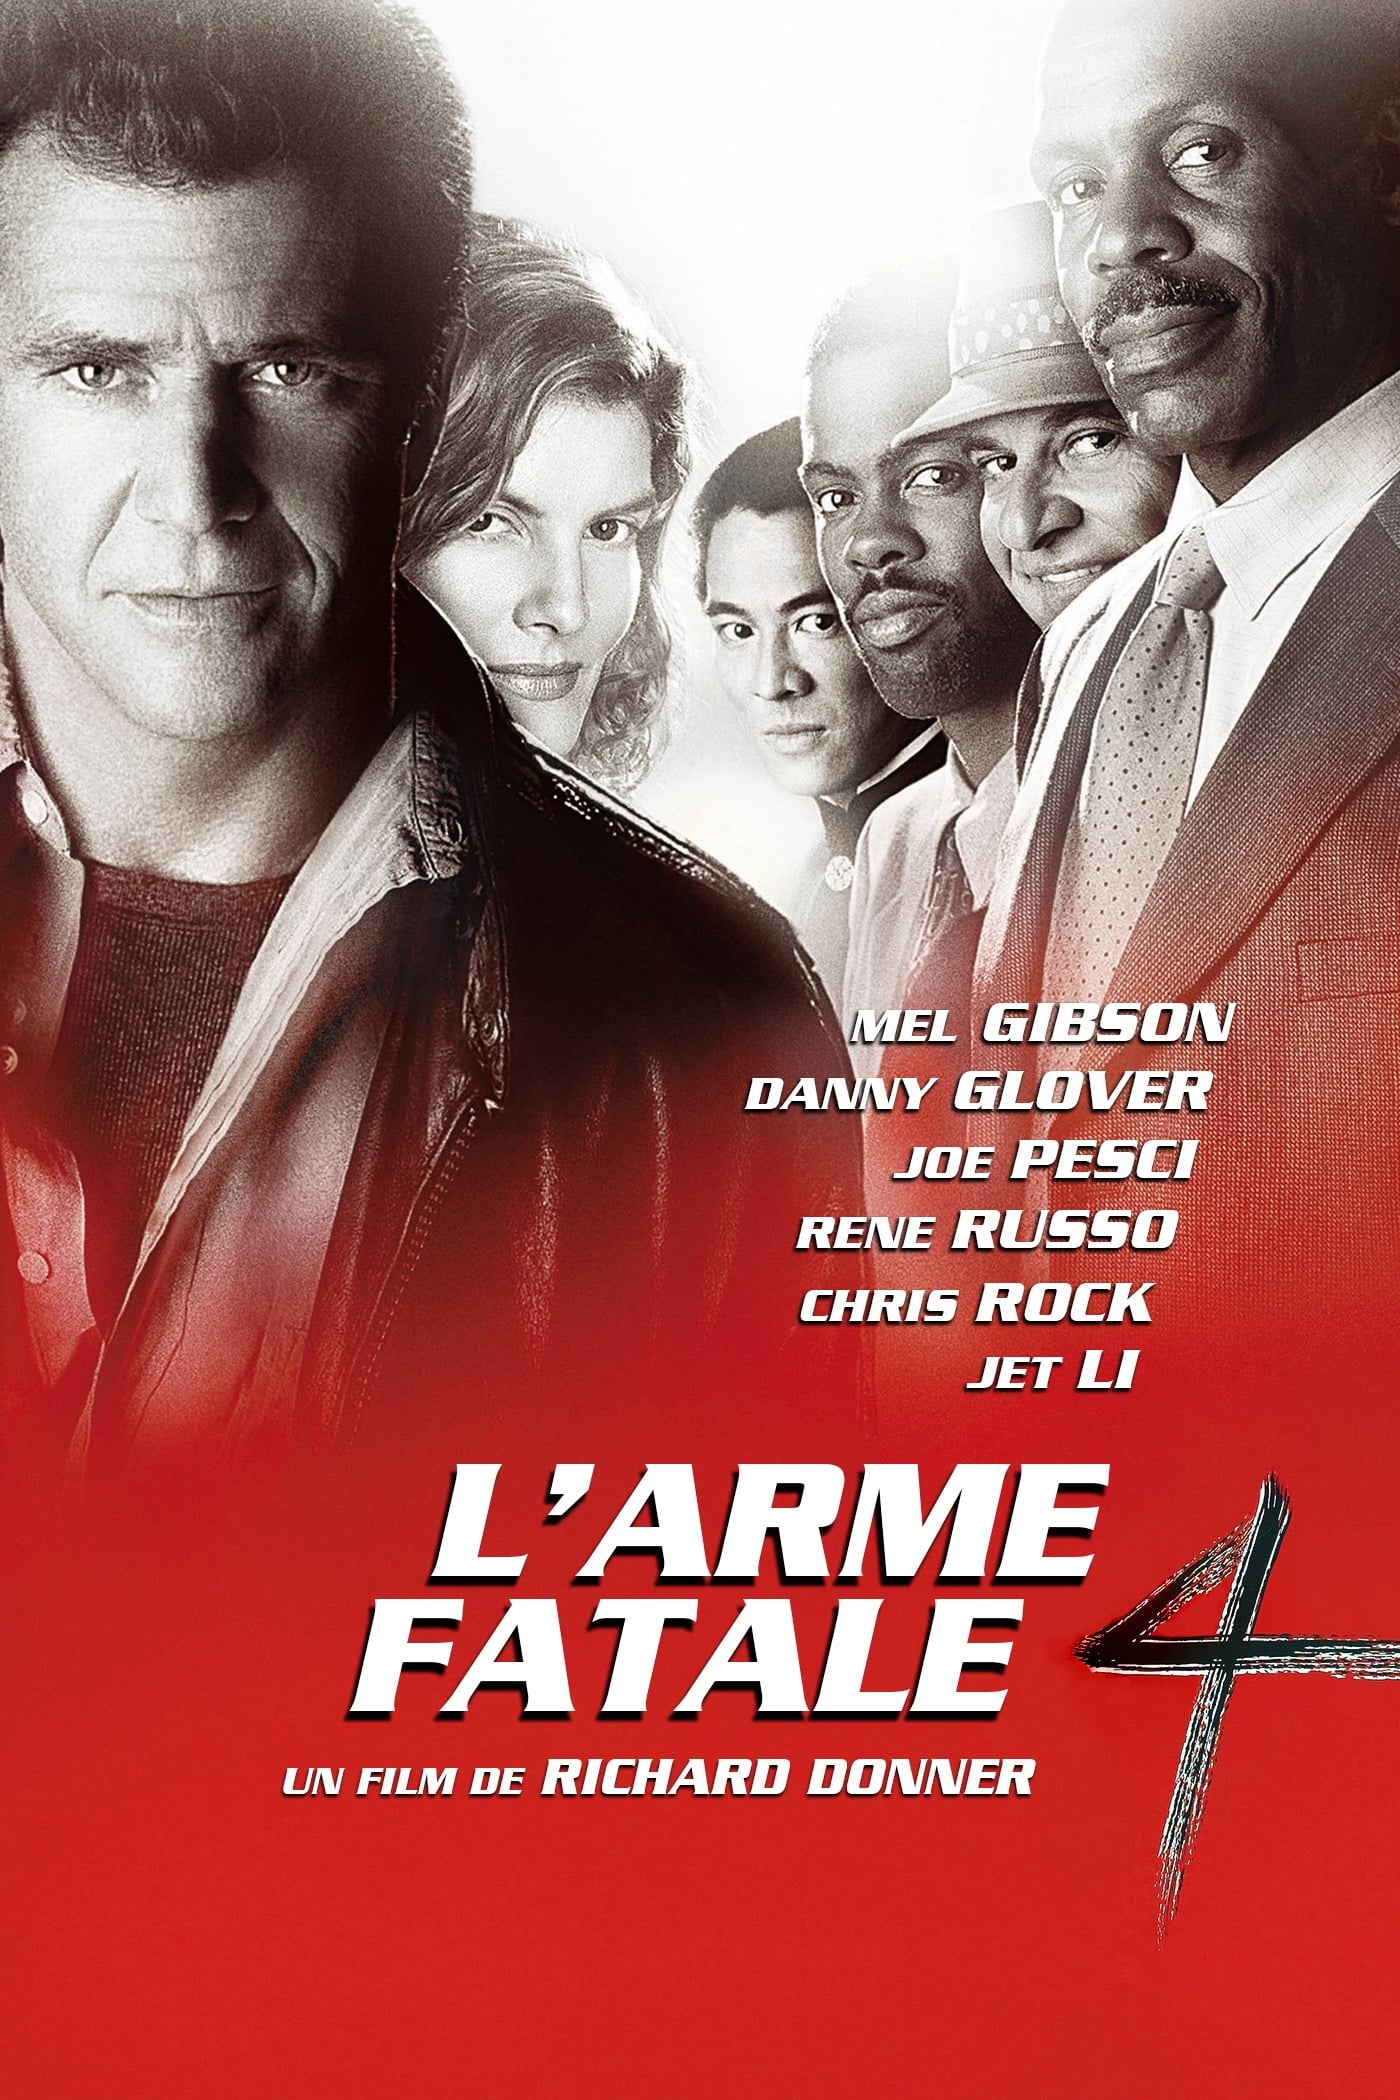 L'Arme fatale 4 Film Streaming